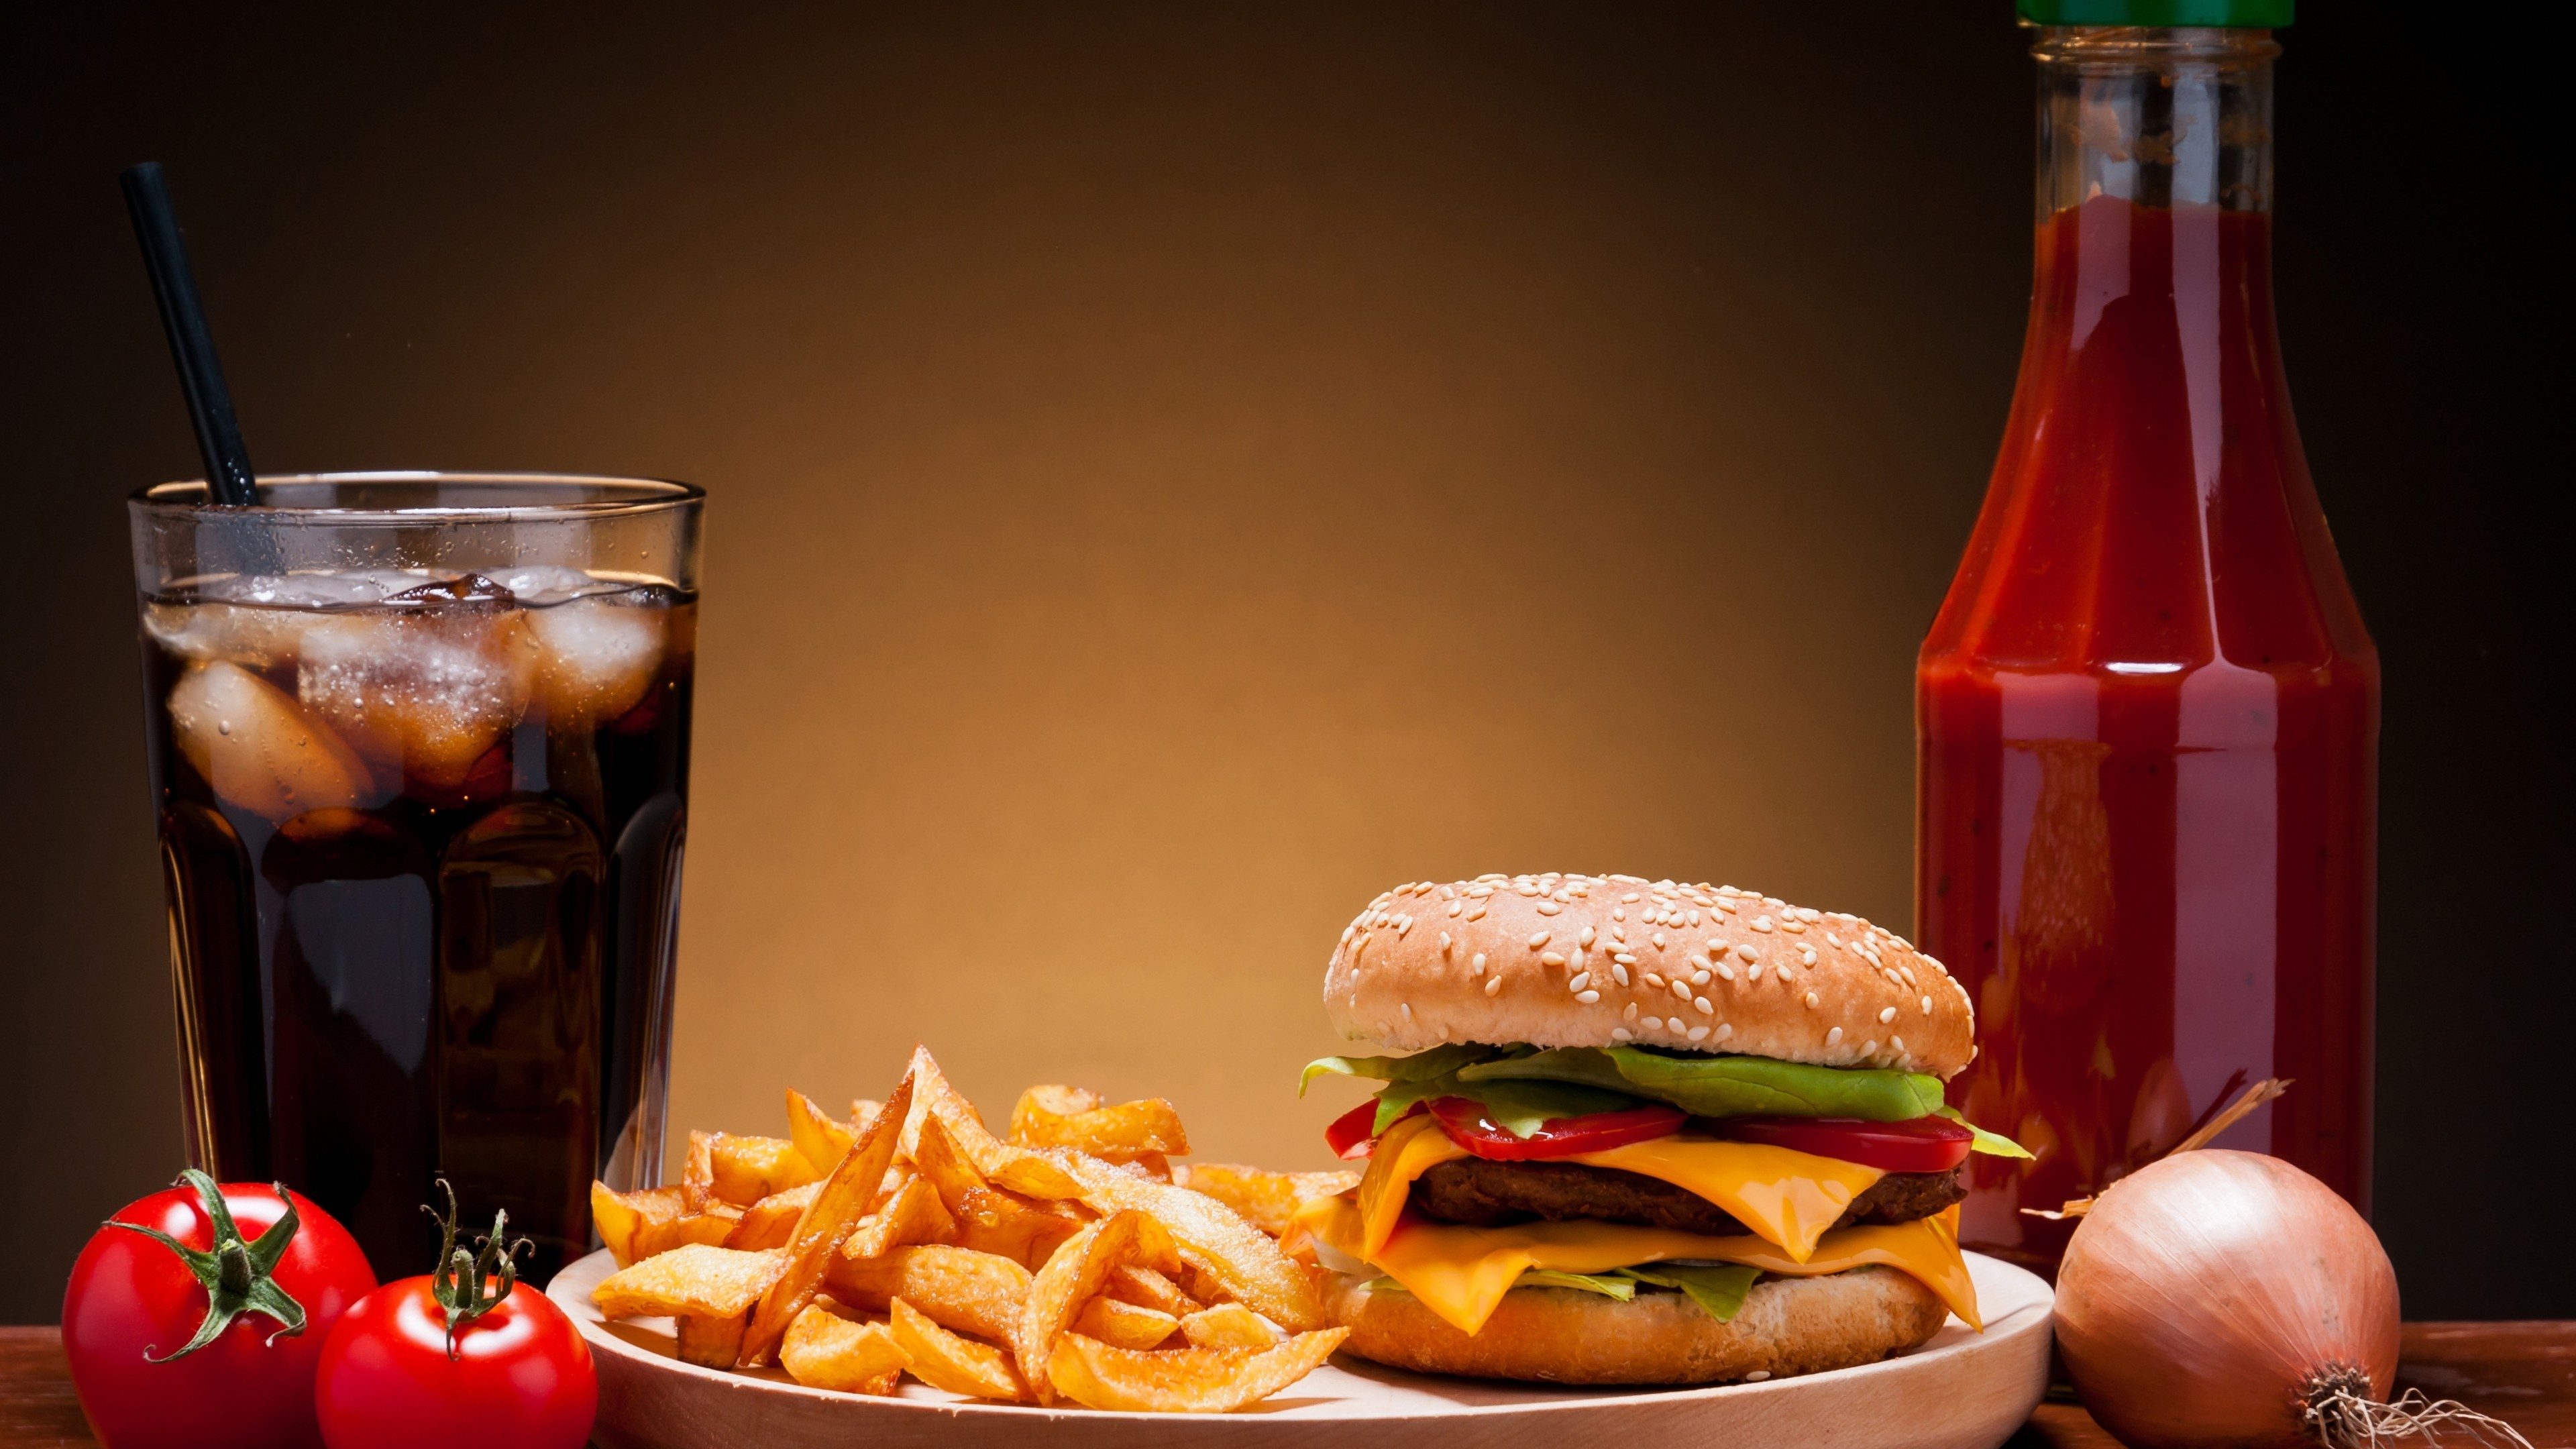 French Fries: Cheeseburger, Fast food, Coca-cola, Ketchup, Tomatoes, Potatoes. 3840x2160 4K Background.